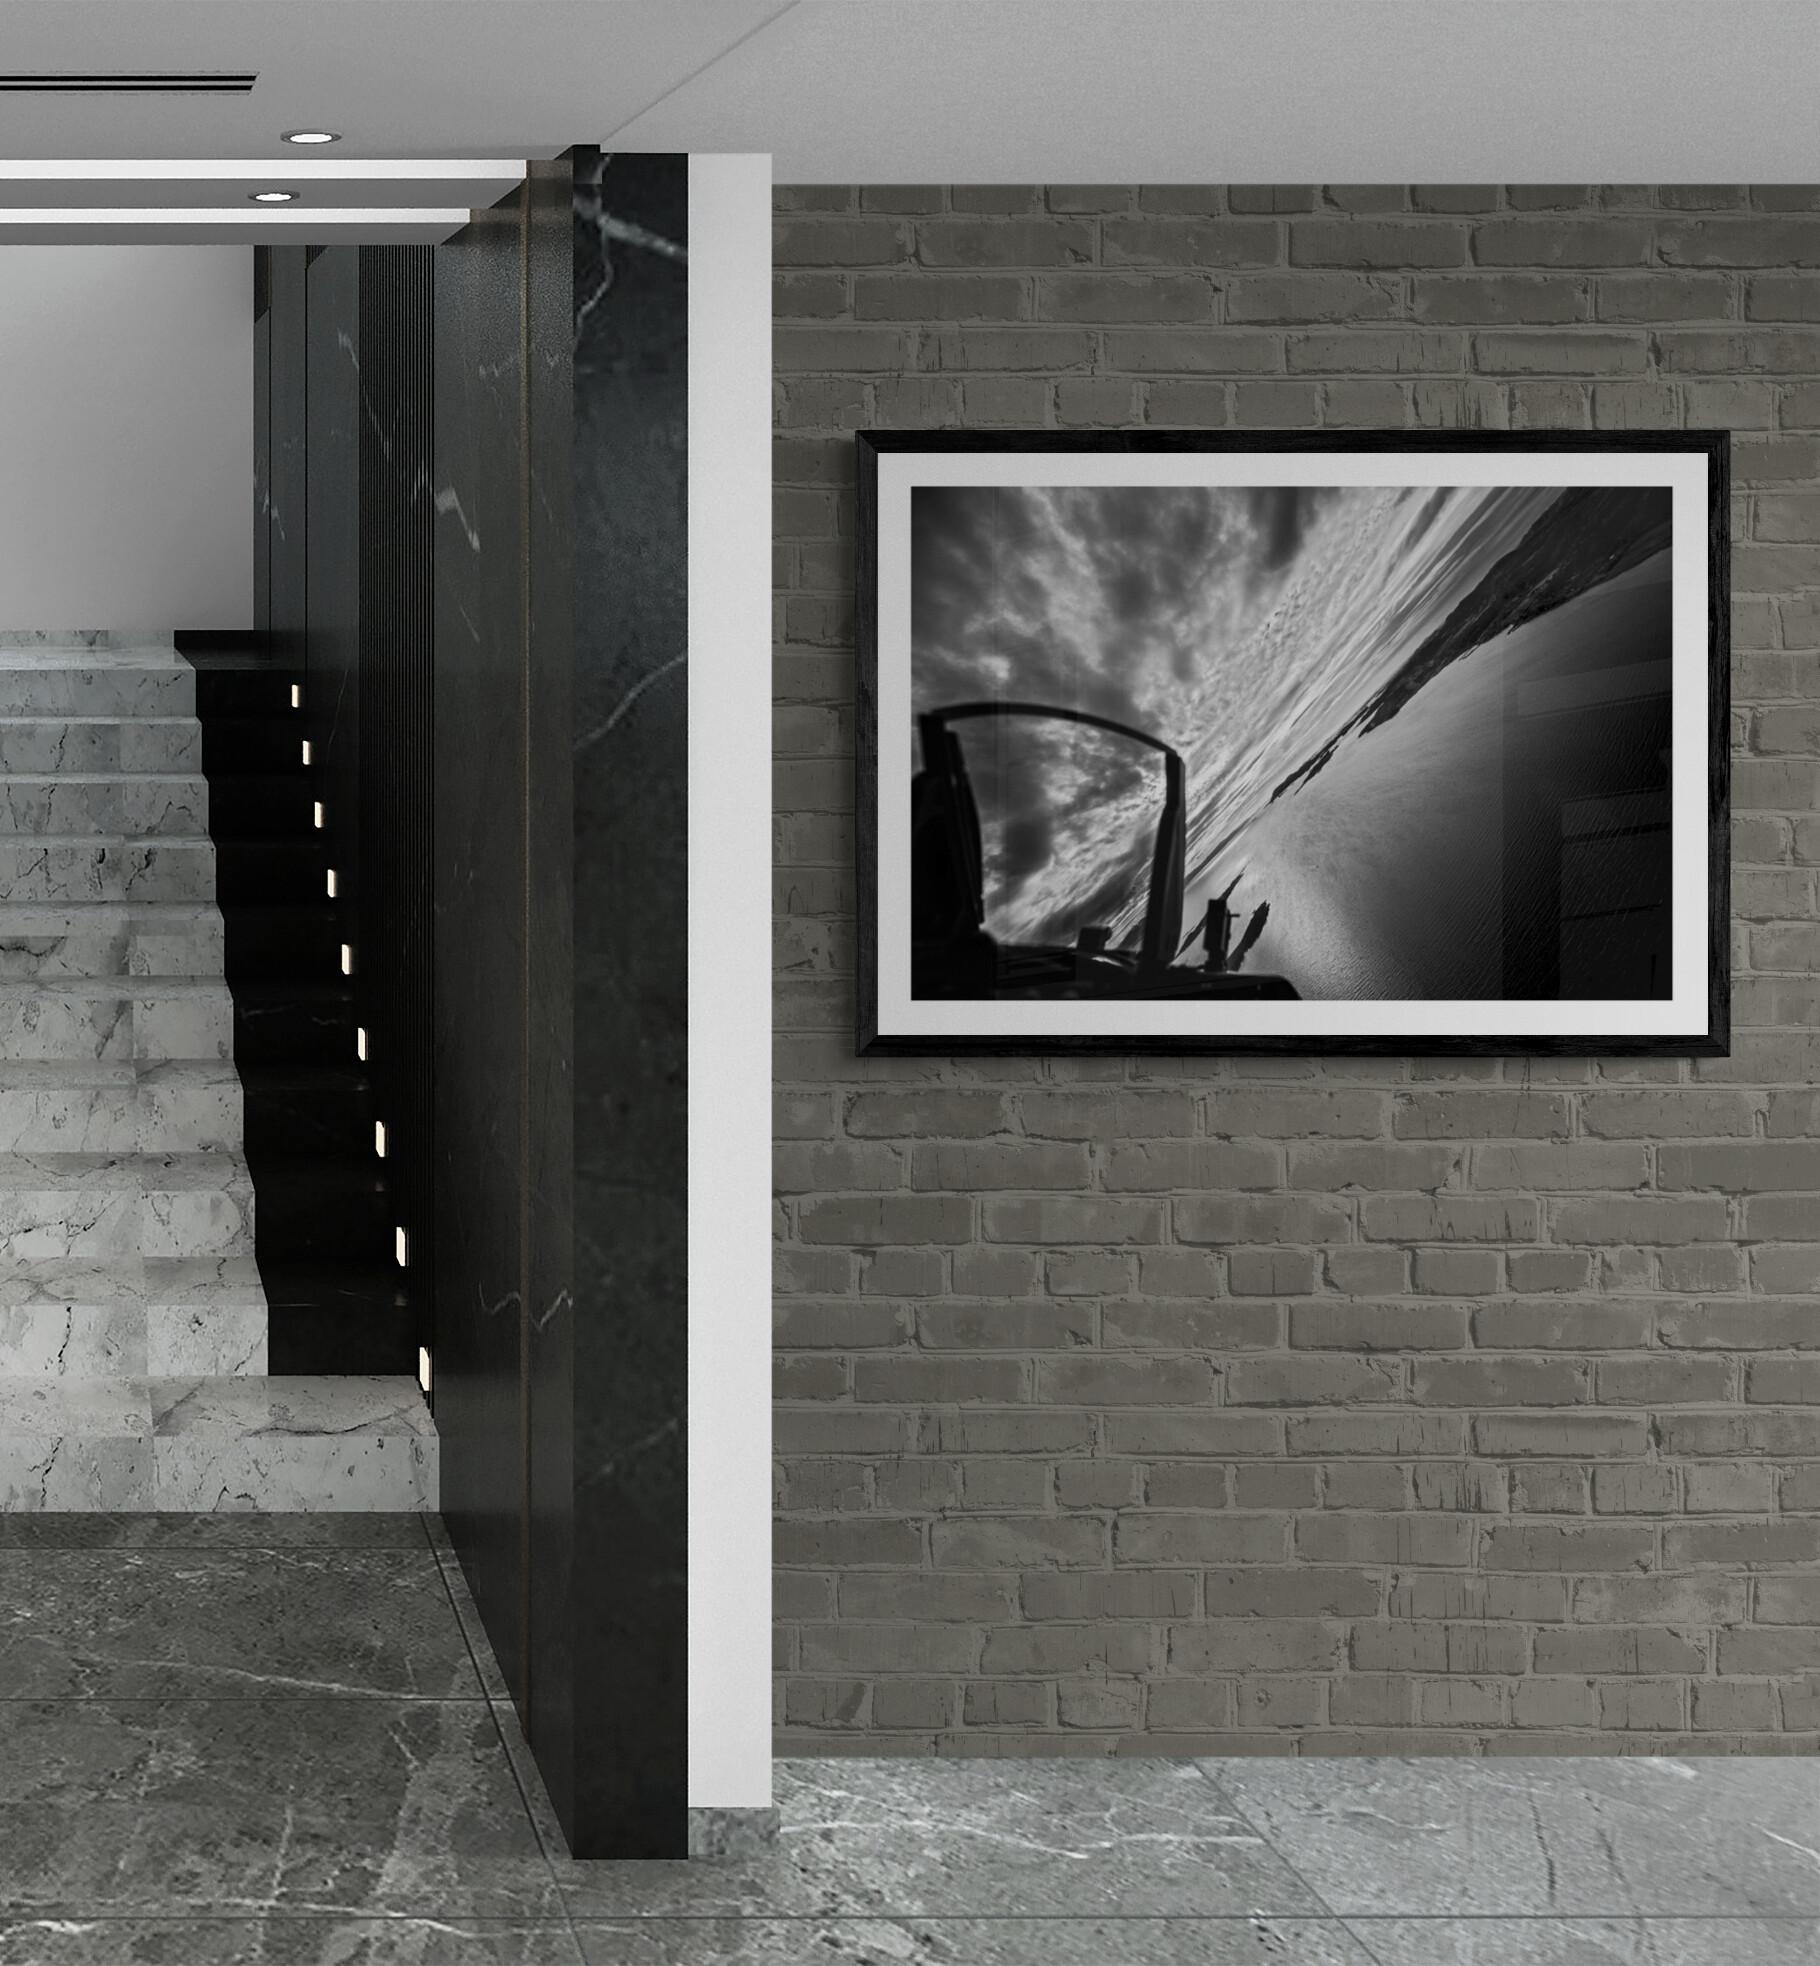 This is # 2/7 Fine Art Print Limited Edition 42cm x 60 cm
VADOR THE SPACE SHOW is the first exhibition of photographs by Stefan Darte which is currently being held in Brussels in the coworking area named The Spaces (Gare Maritime - Tour & Taxis)